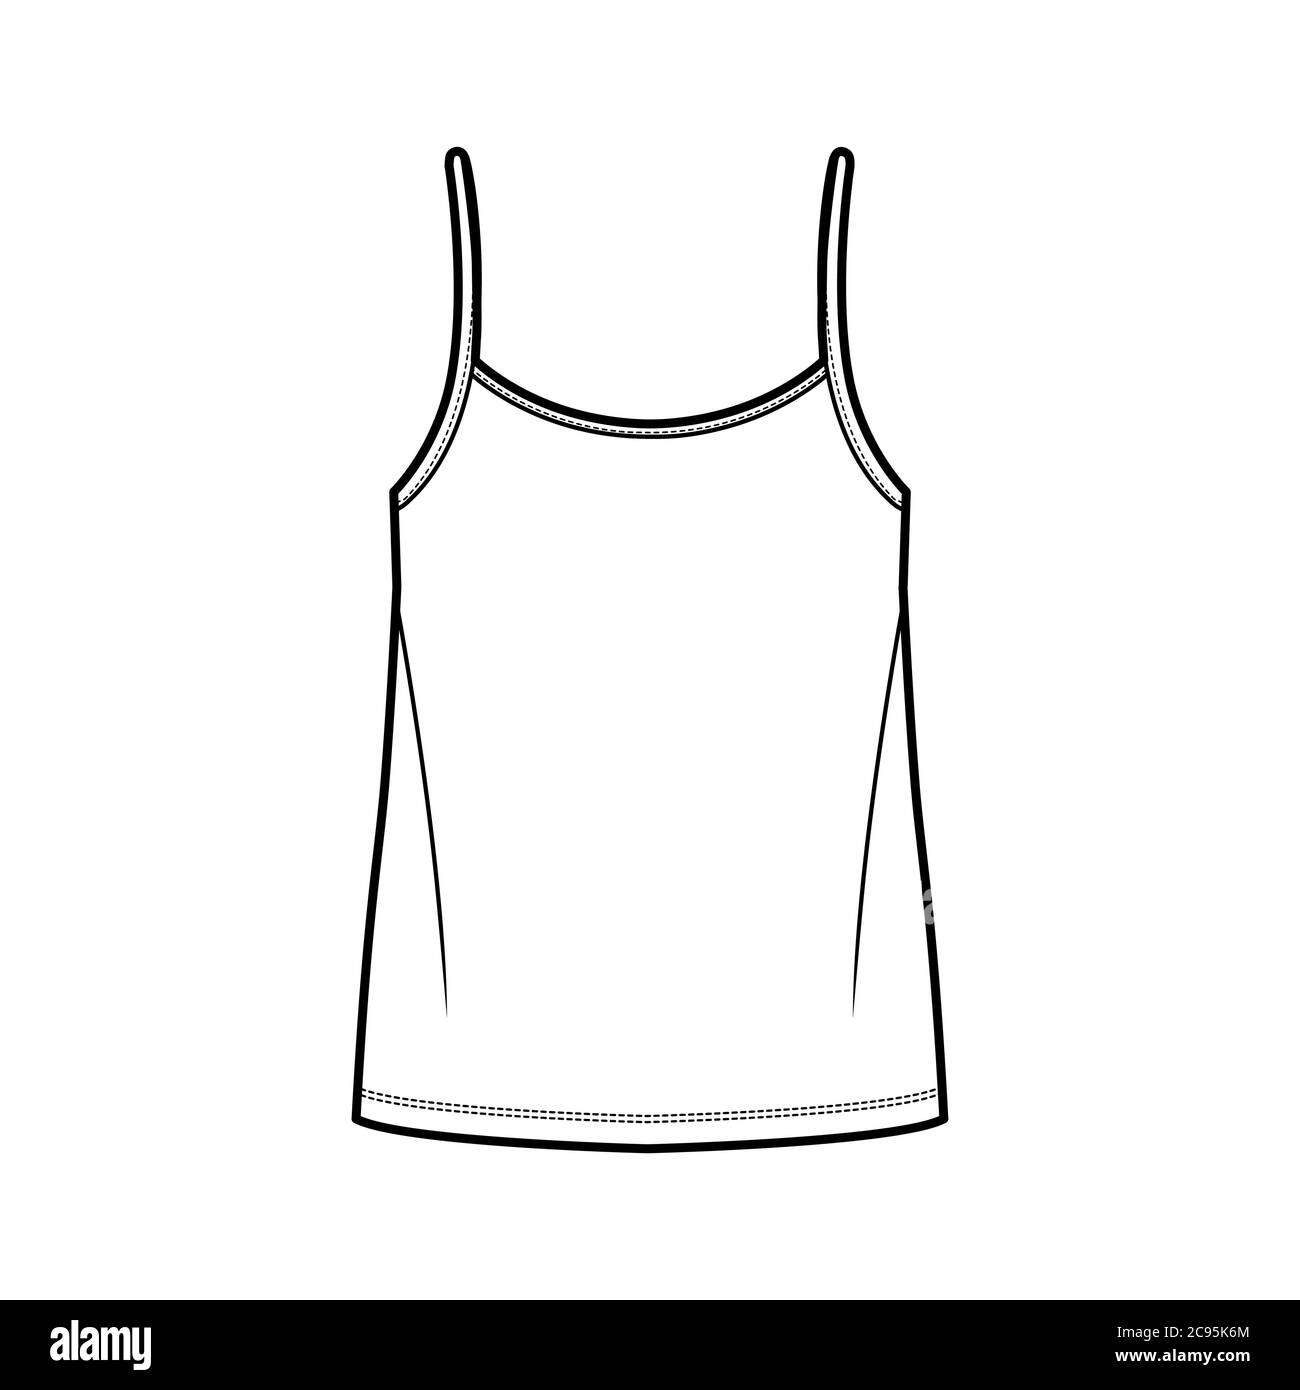 Camisole top technical fashion illustration with oversized body, bonded ...